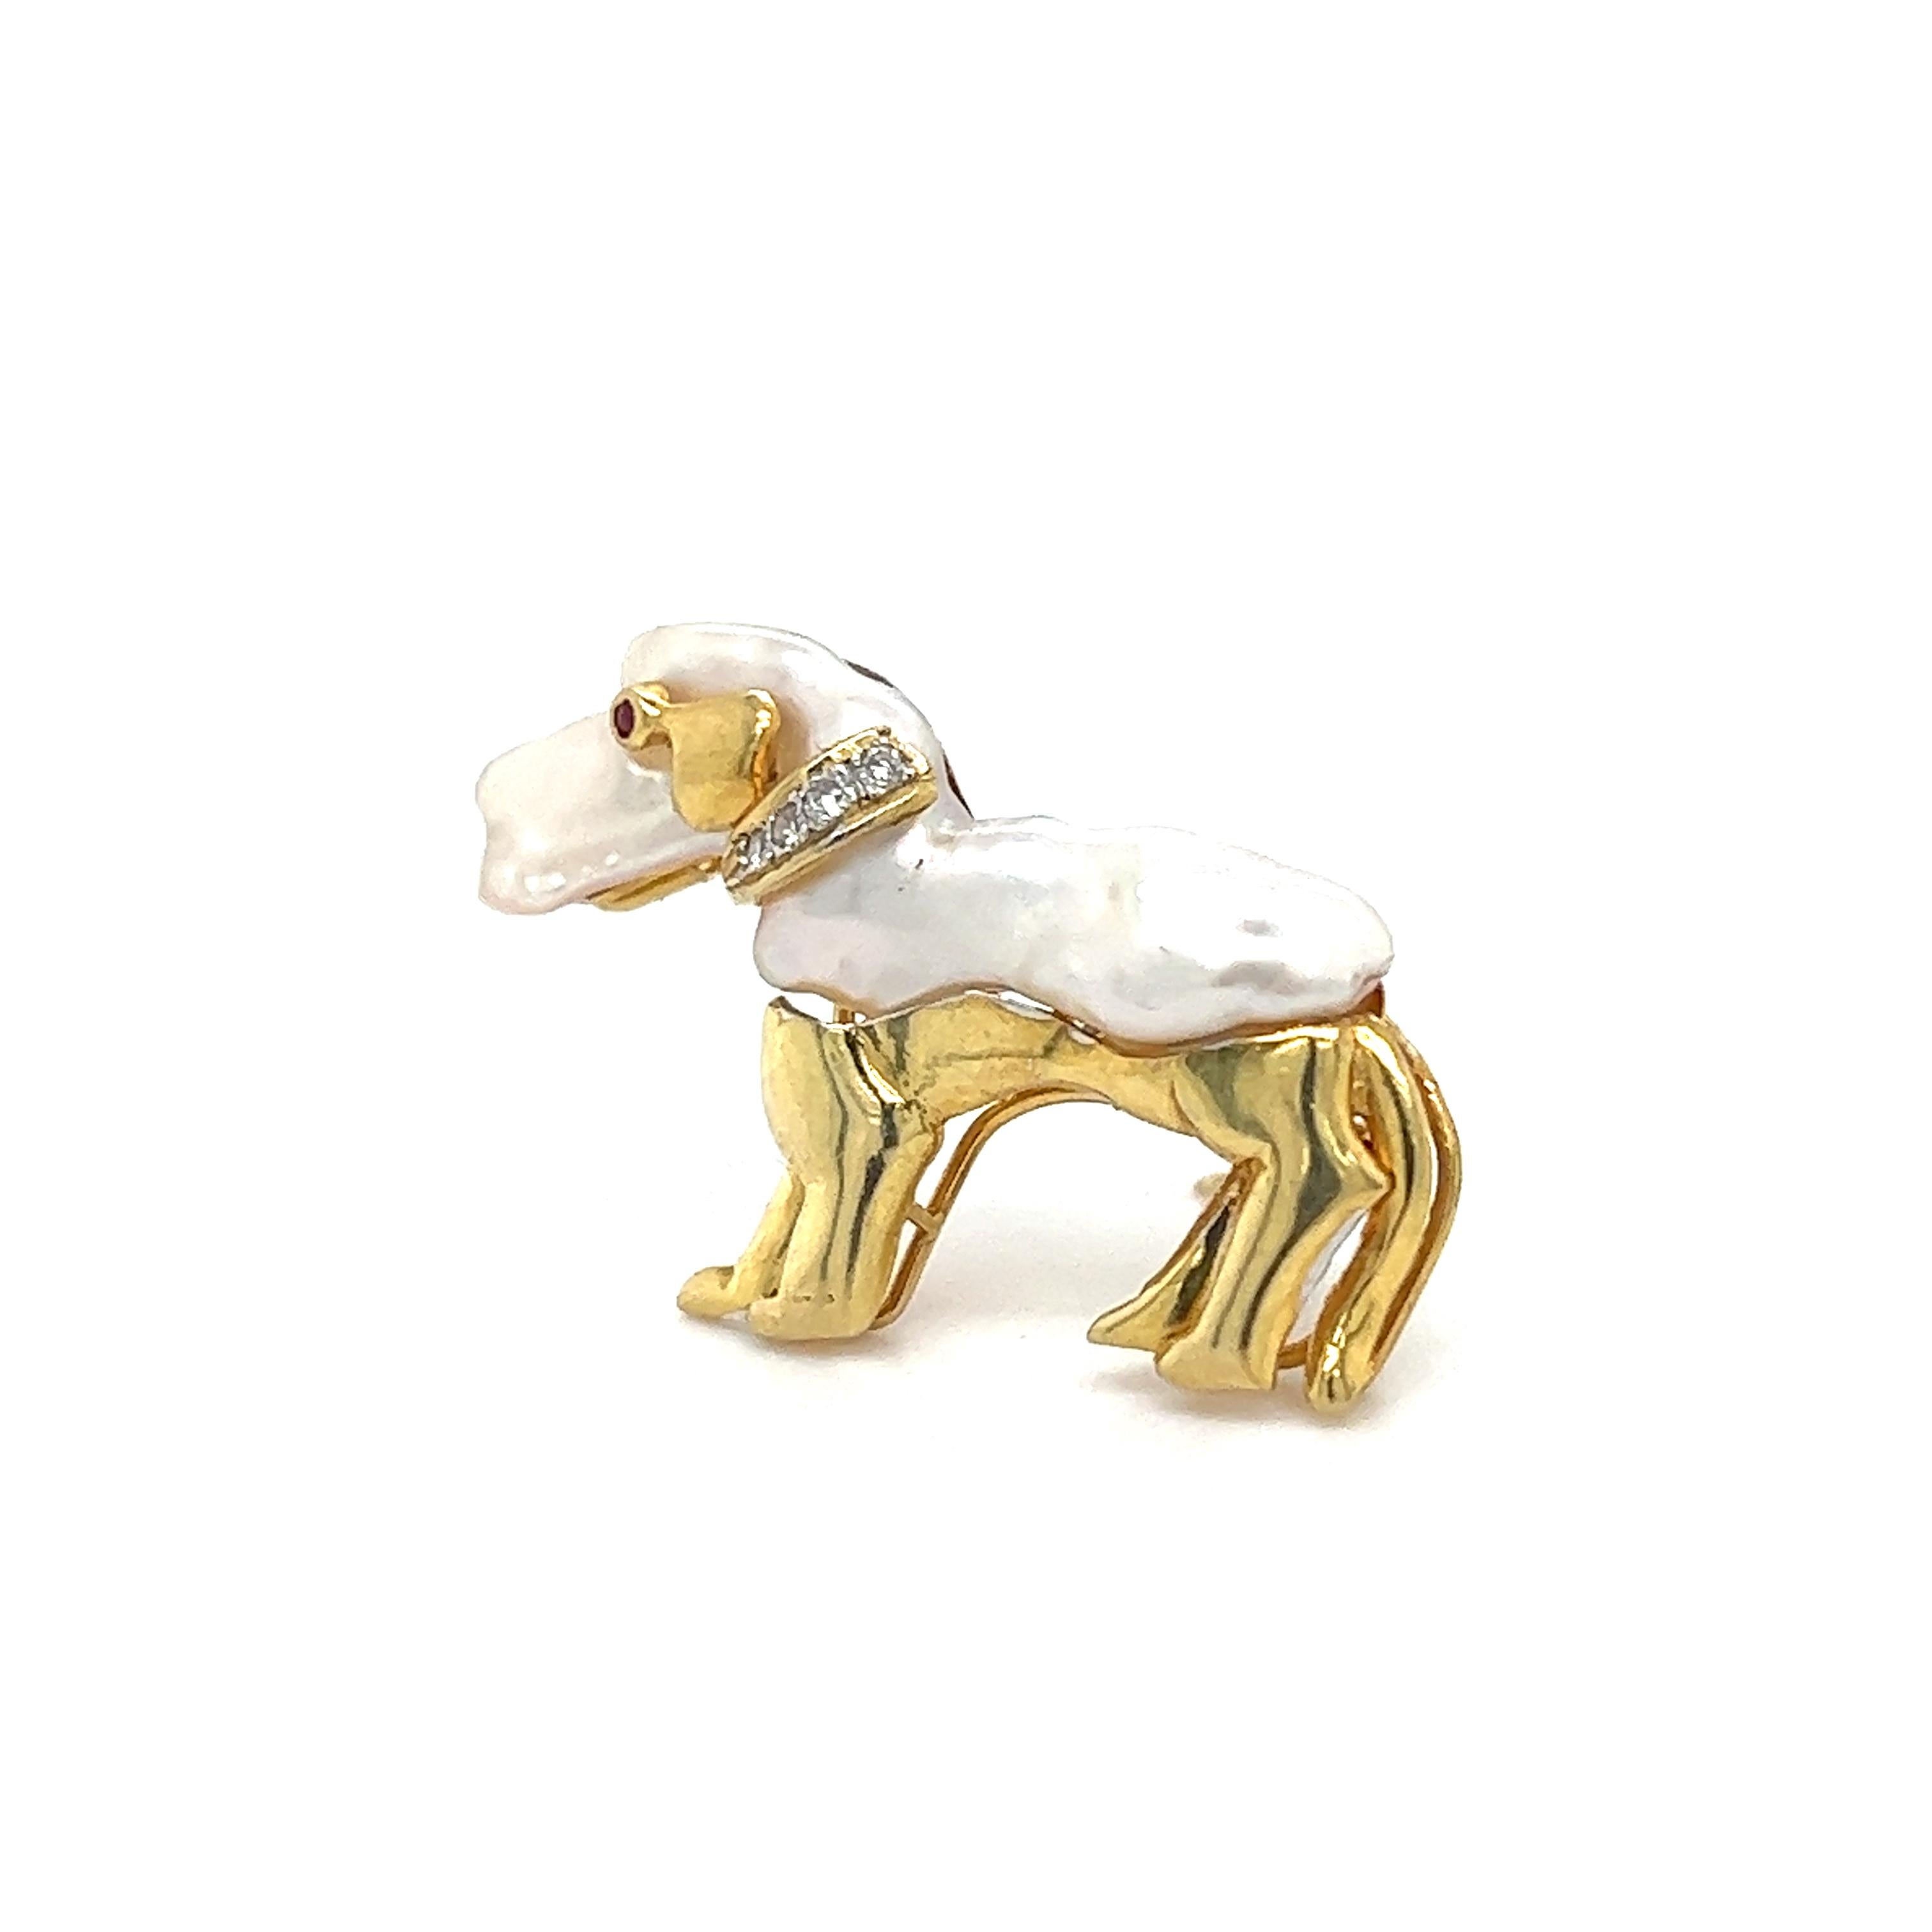 Details are endless on this one of a kind Dachshund brooch/pendant. The piece is crafted in 14k yellow gold and perfectly depicts this lovable dog breed. The body and head section of the dog is set with a natural Keshi pearl. A pop of scintillation